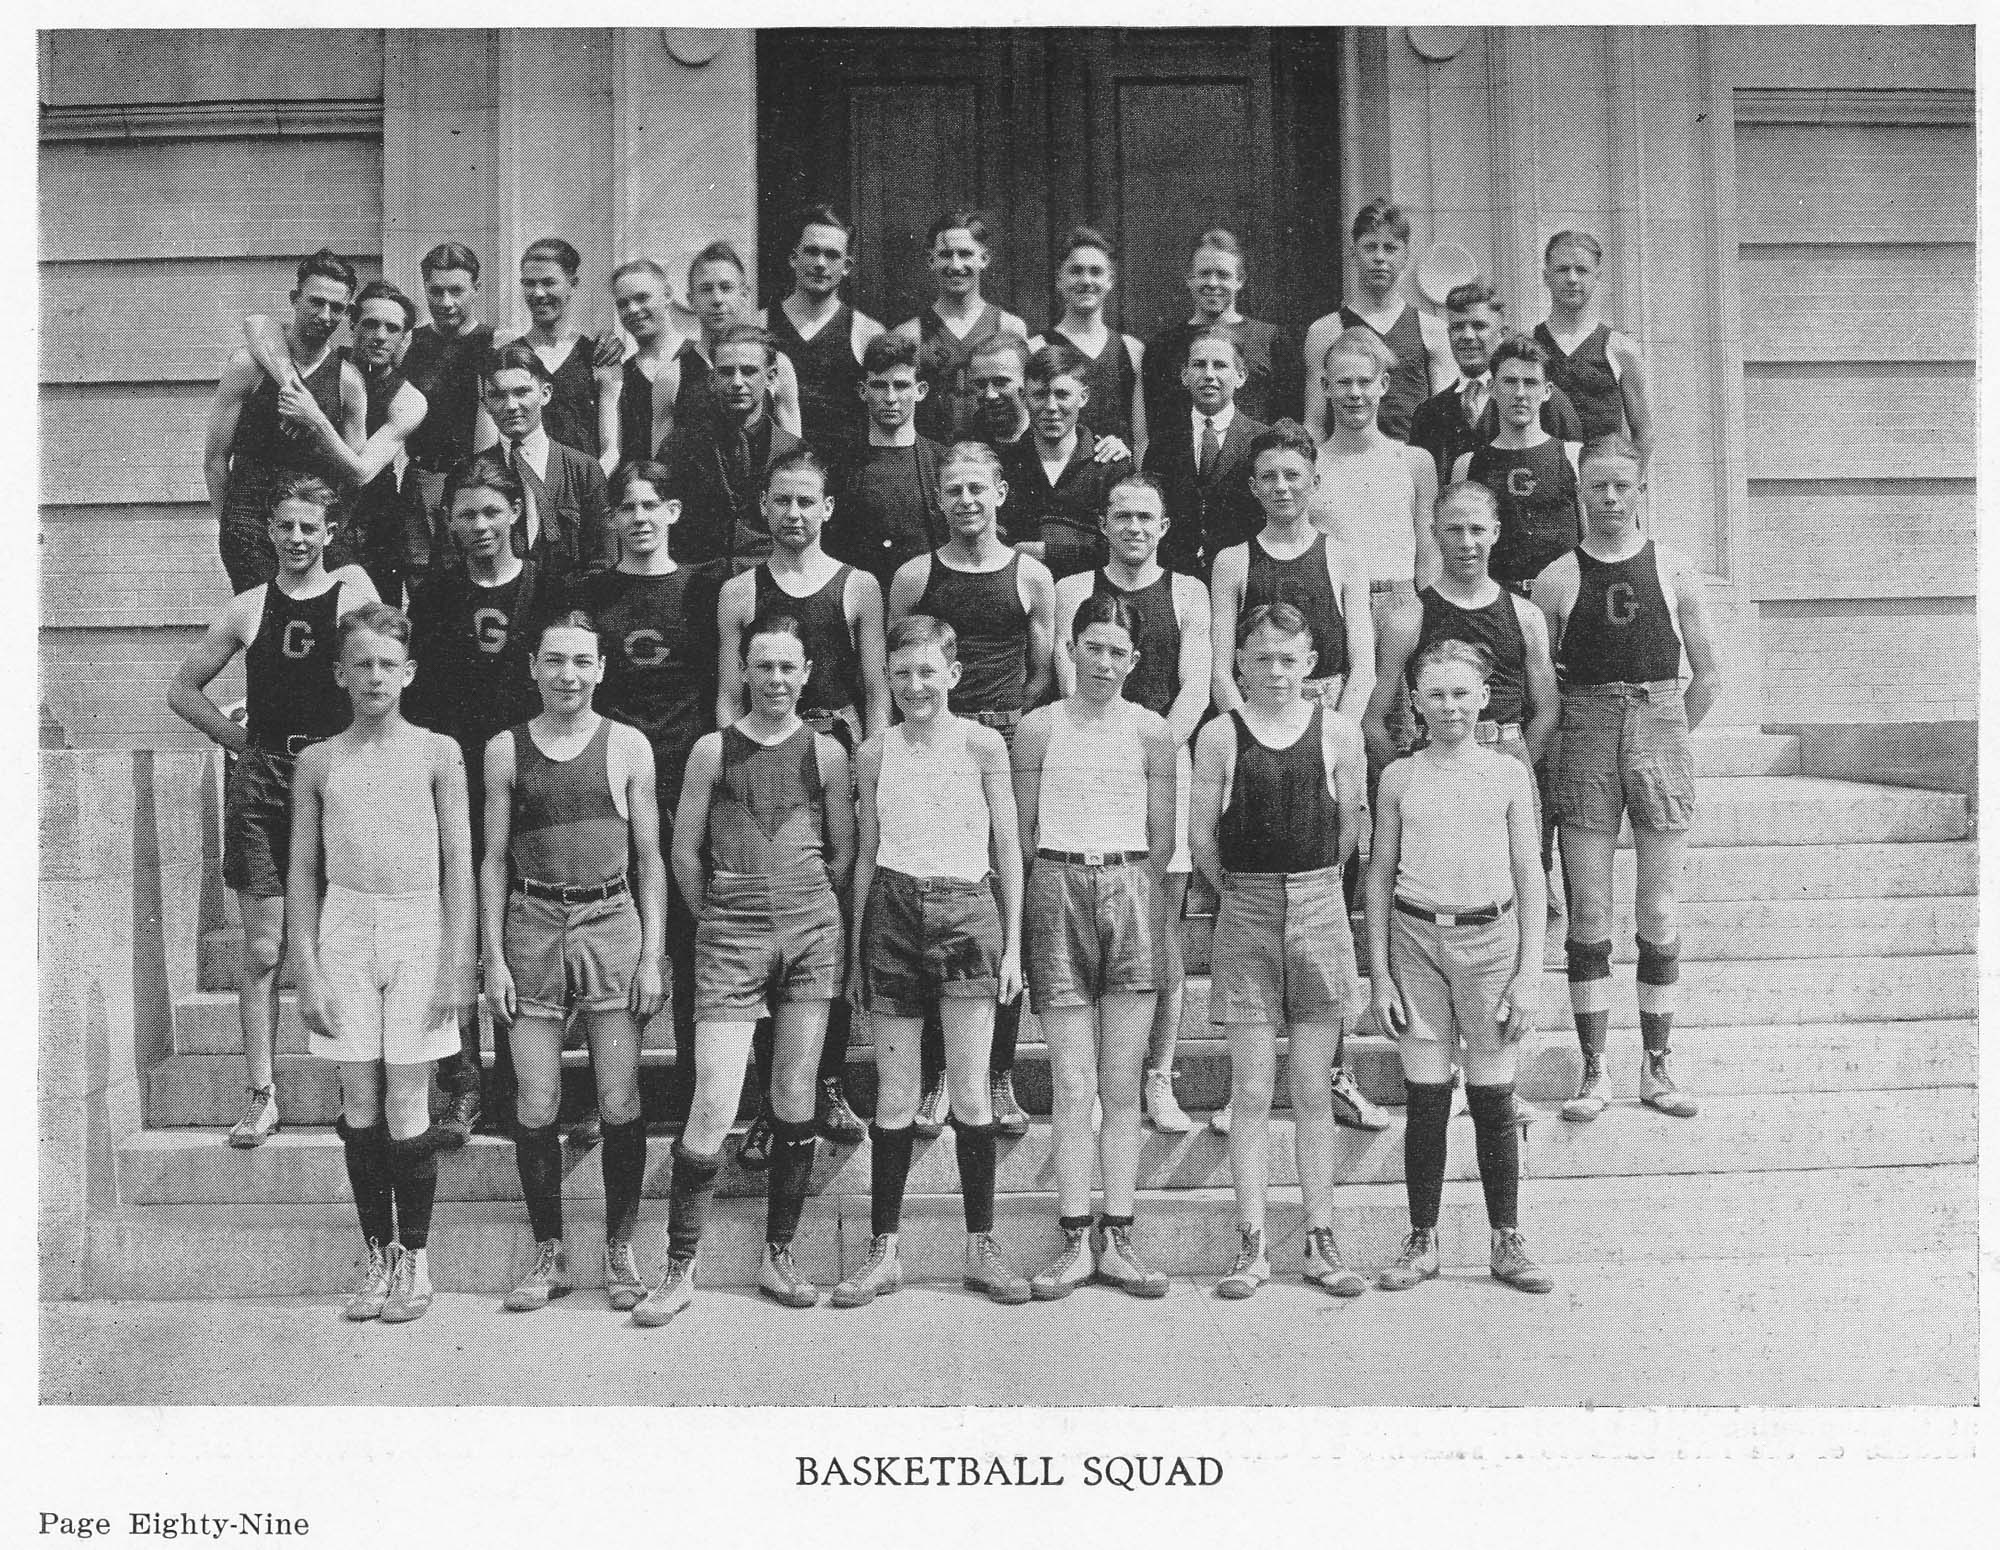 Dauth Family Archive - 1922 - Spud Yearbook - June Dauth With The Basketball Squad